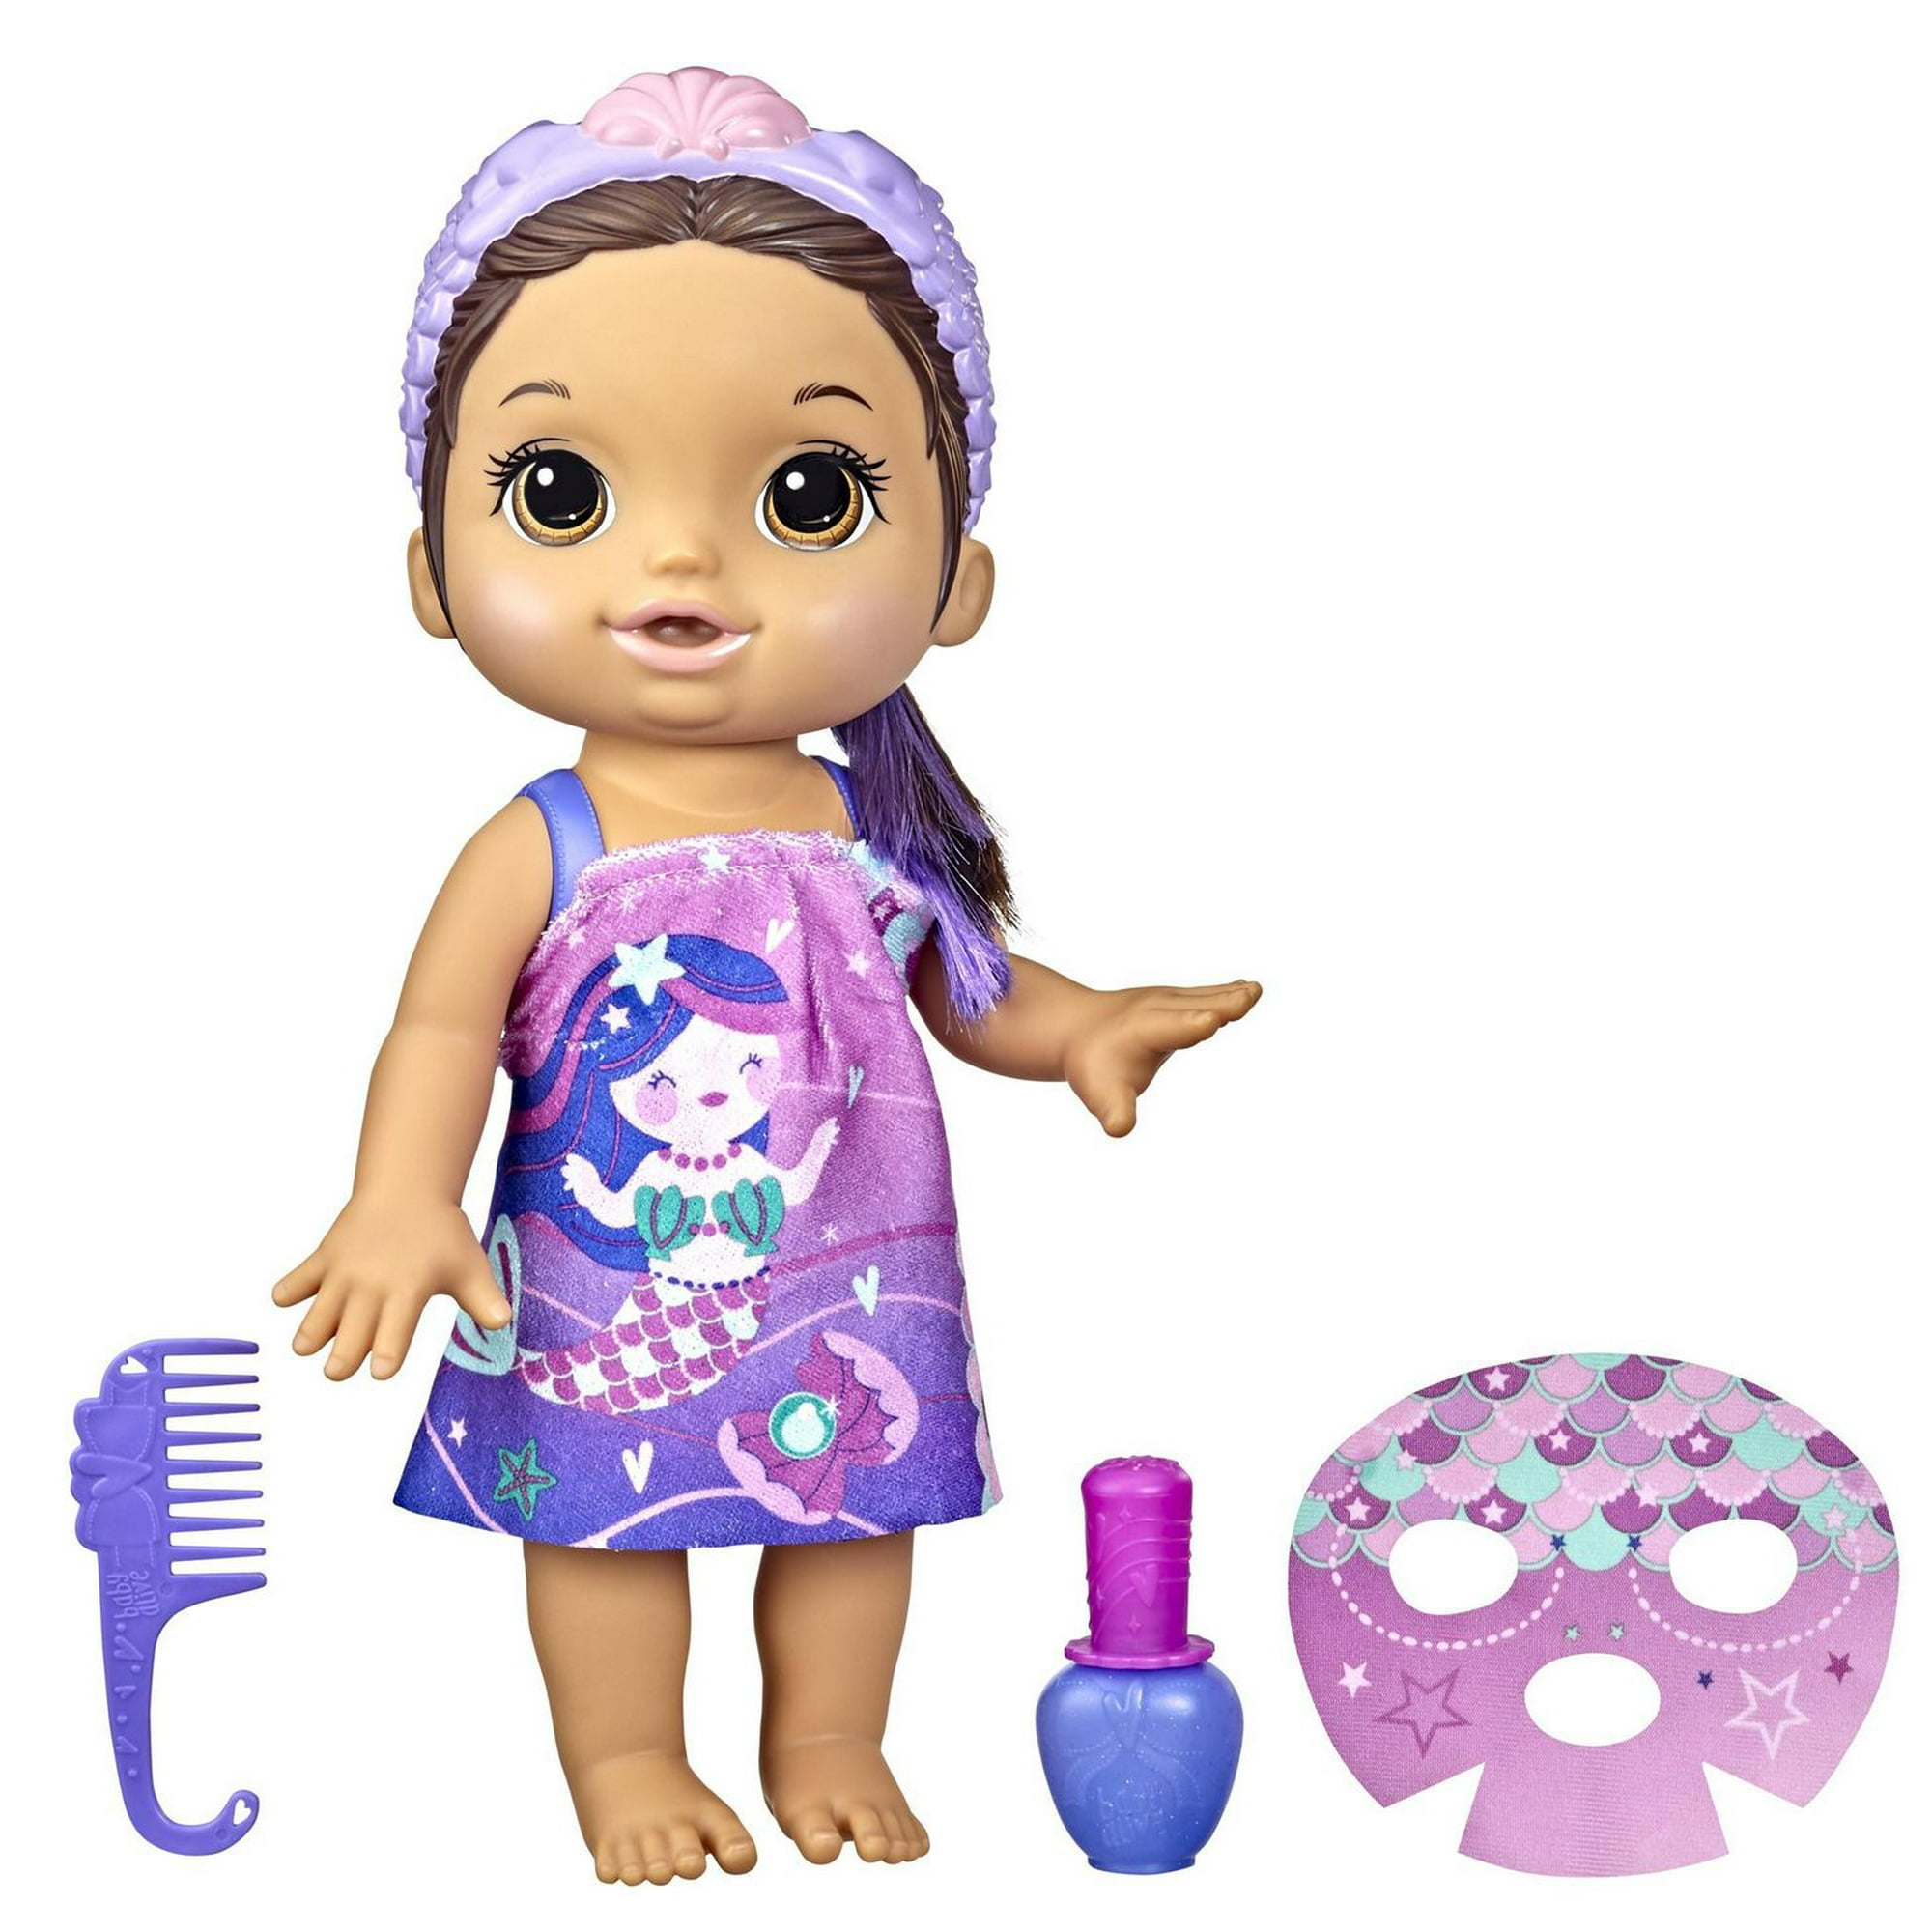 Baby Alive Glam Spa Baby Doll, Mermaid, Makeup Toy for Kids, Color